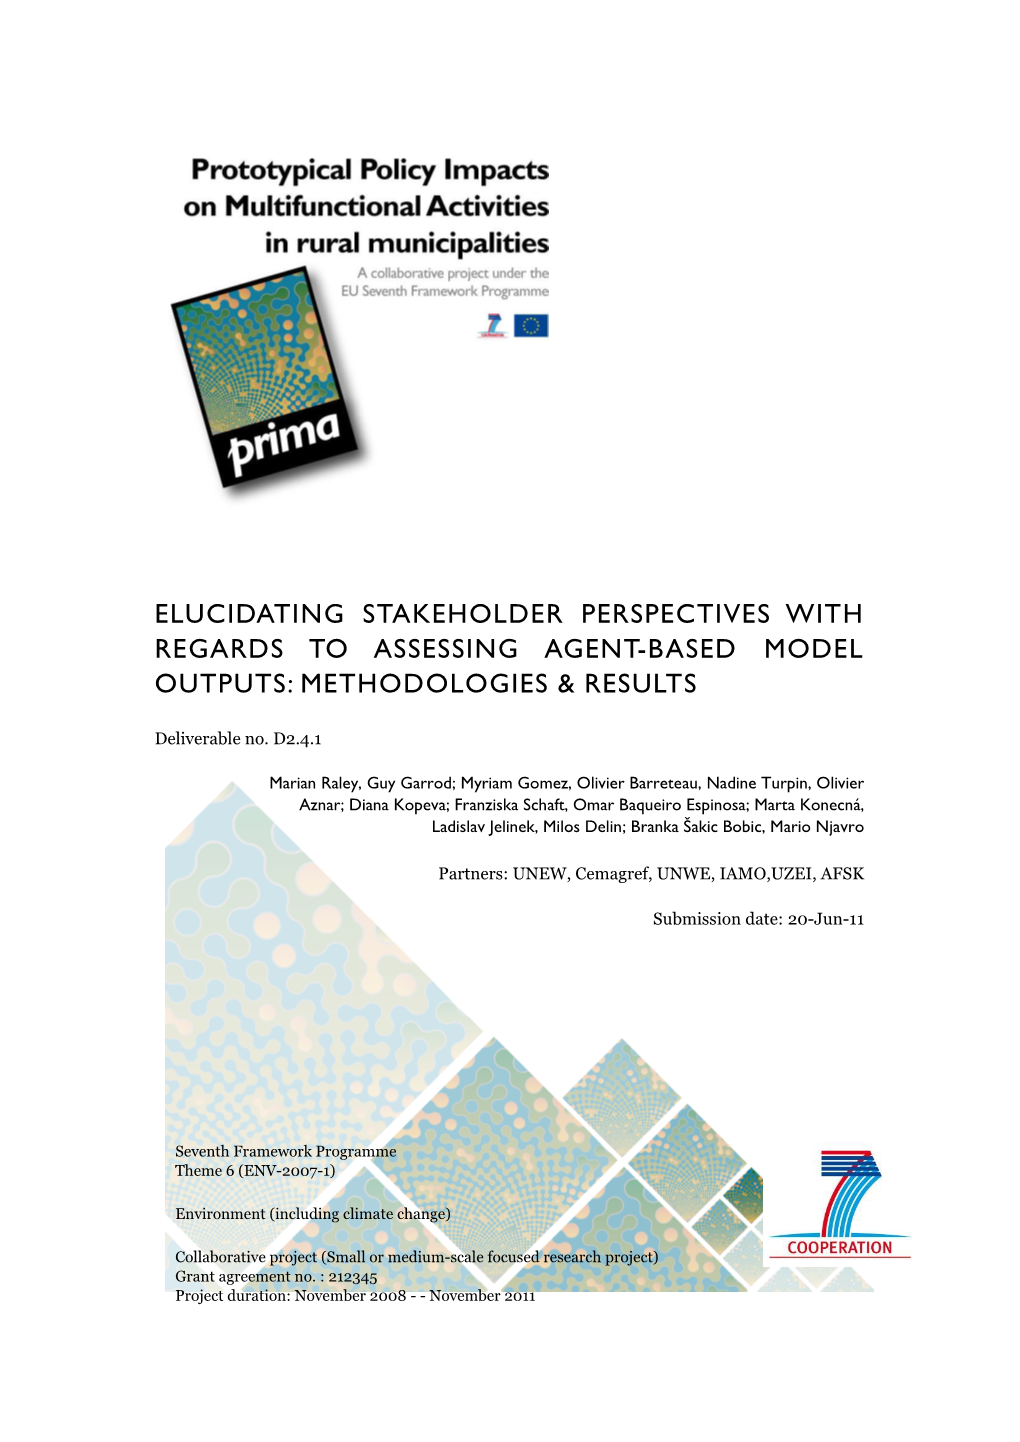 Elucidating Stakeholder Perspectives with Regards to Assessing Agent-Based Model Outputs: Methodologies & Results